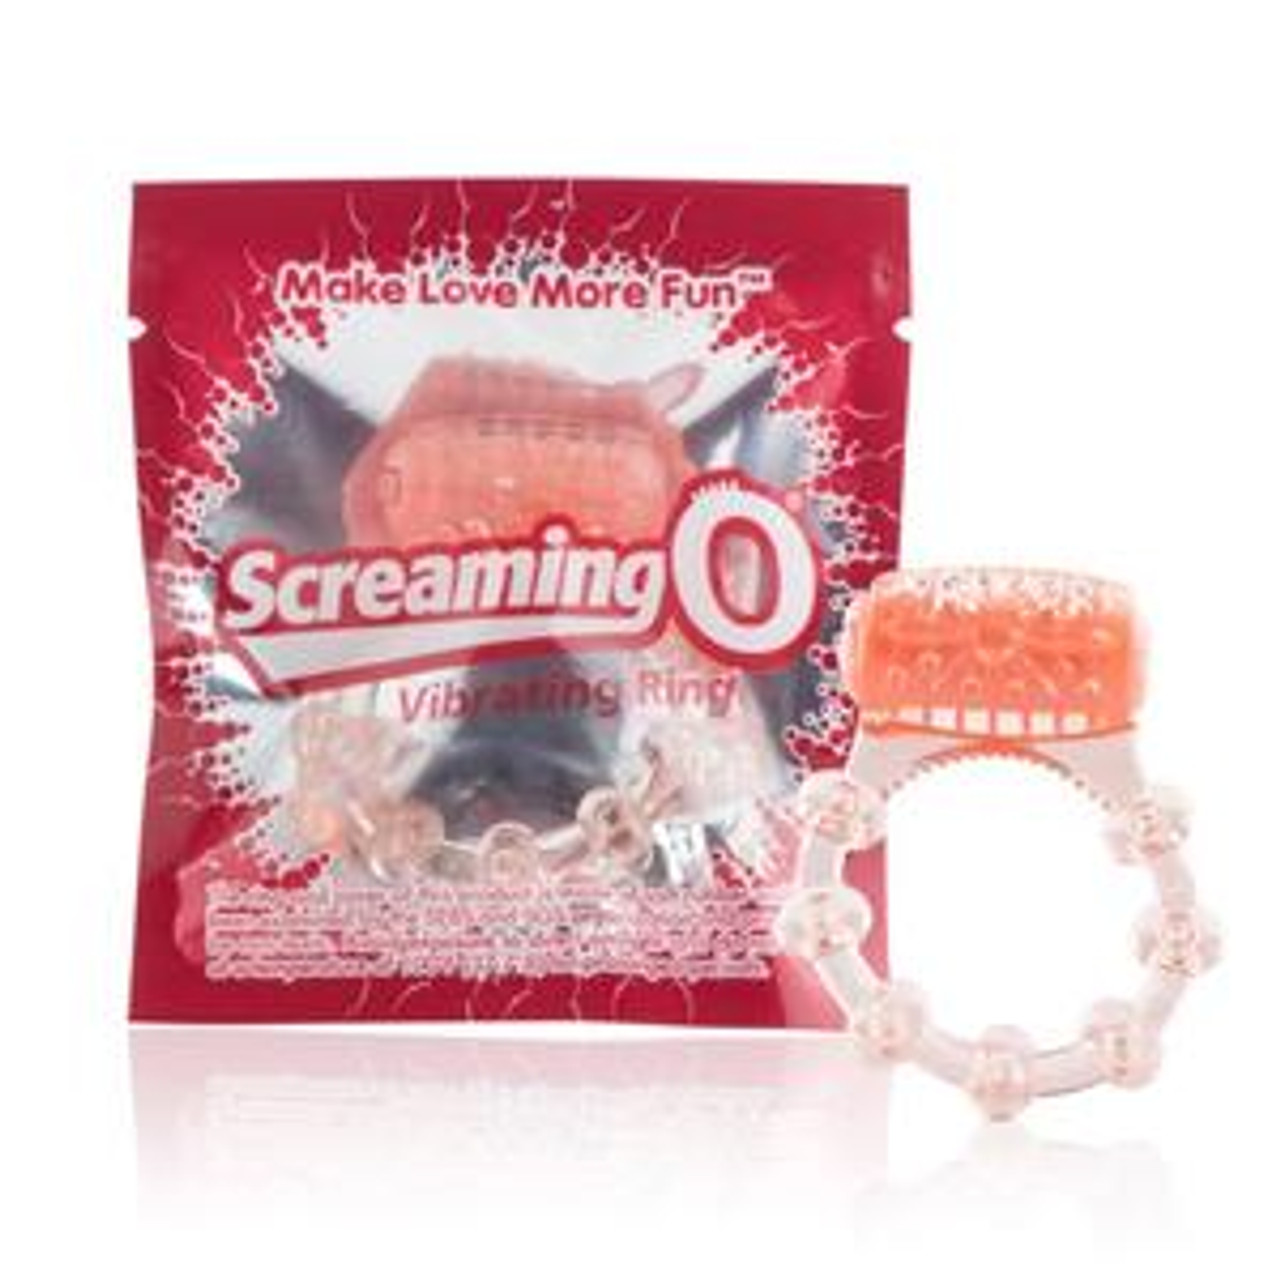 Buy Screaming O Vibrating Ring Online | CondomsFast